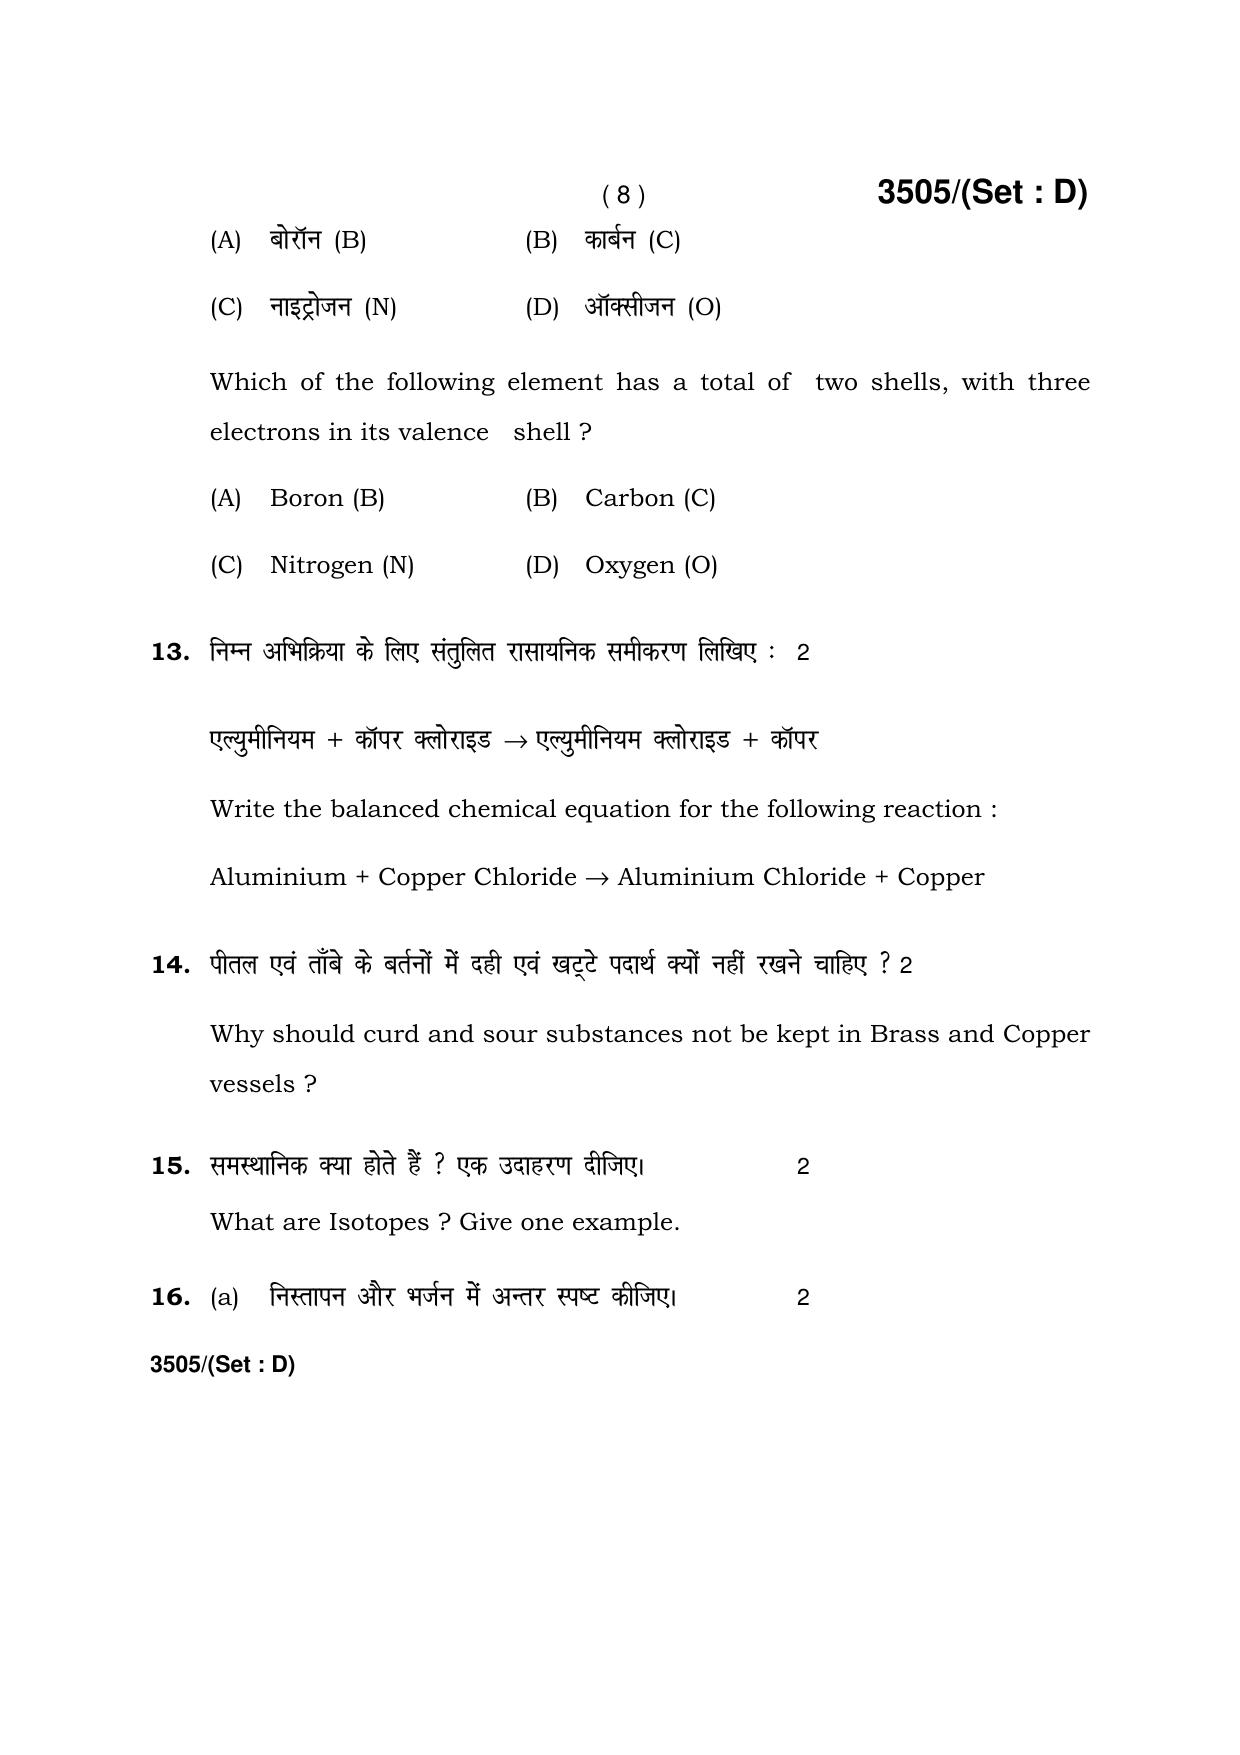 Haryana Board HBSE Class 10 Science -D 2018 Question Paper - Page 8